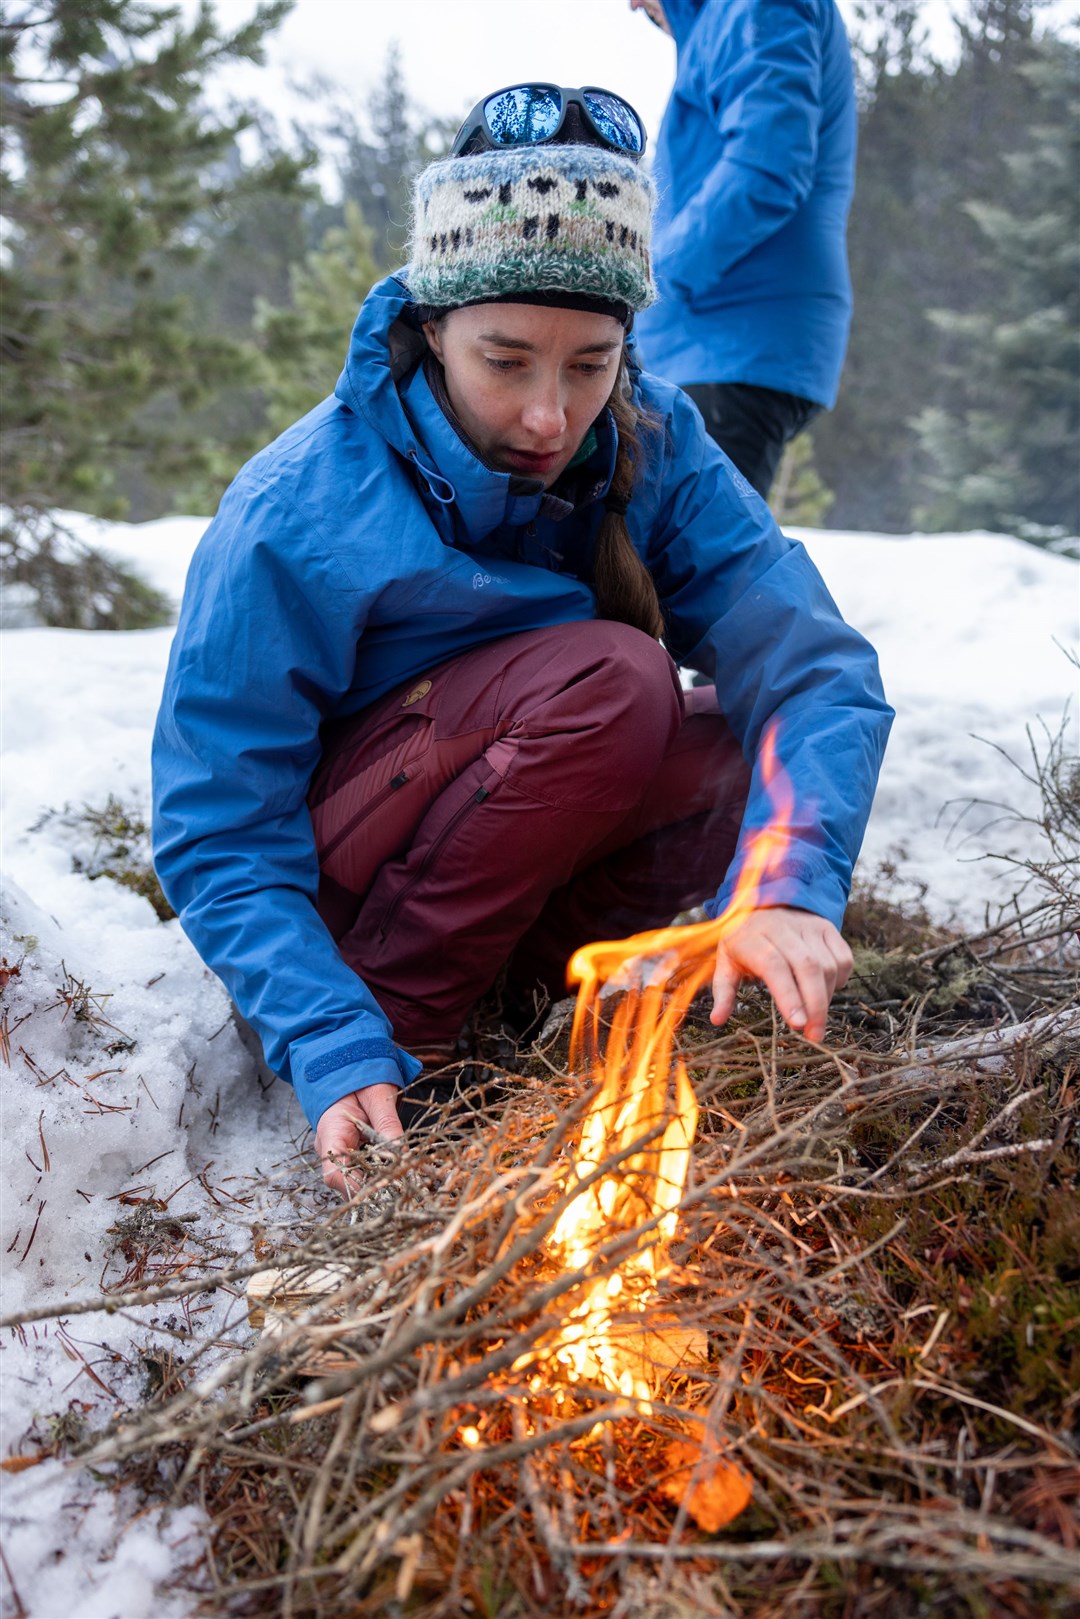 Rosemary Coogan during winter survival training in the snowy mountains of the Spanish Pyrenees (Trailhaven/ESA/PA)